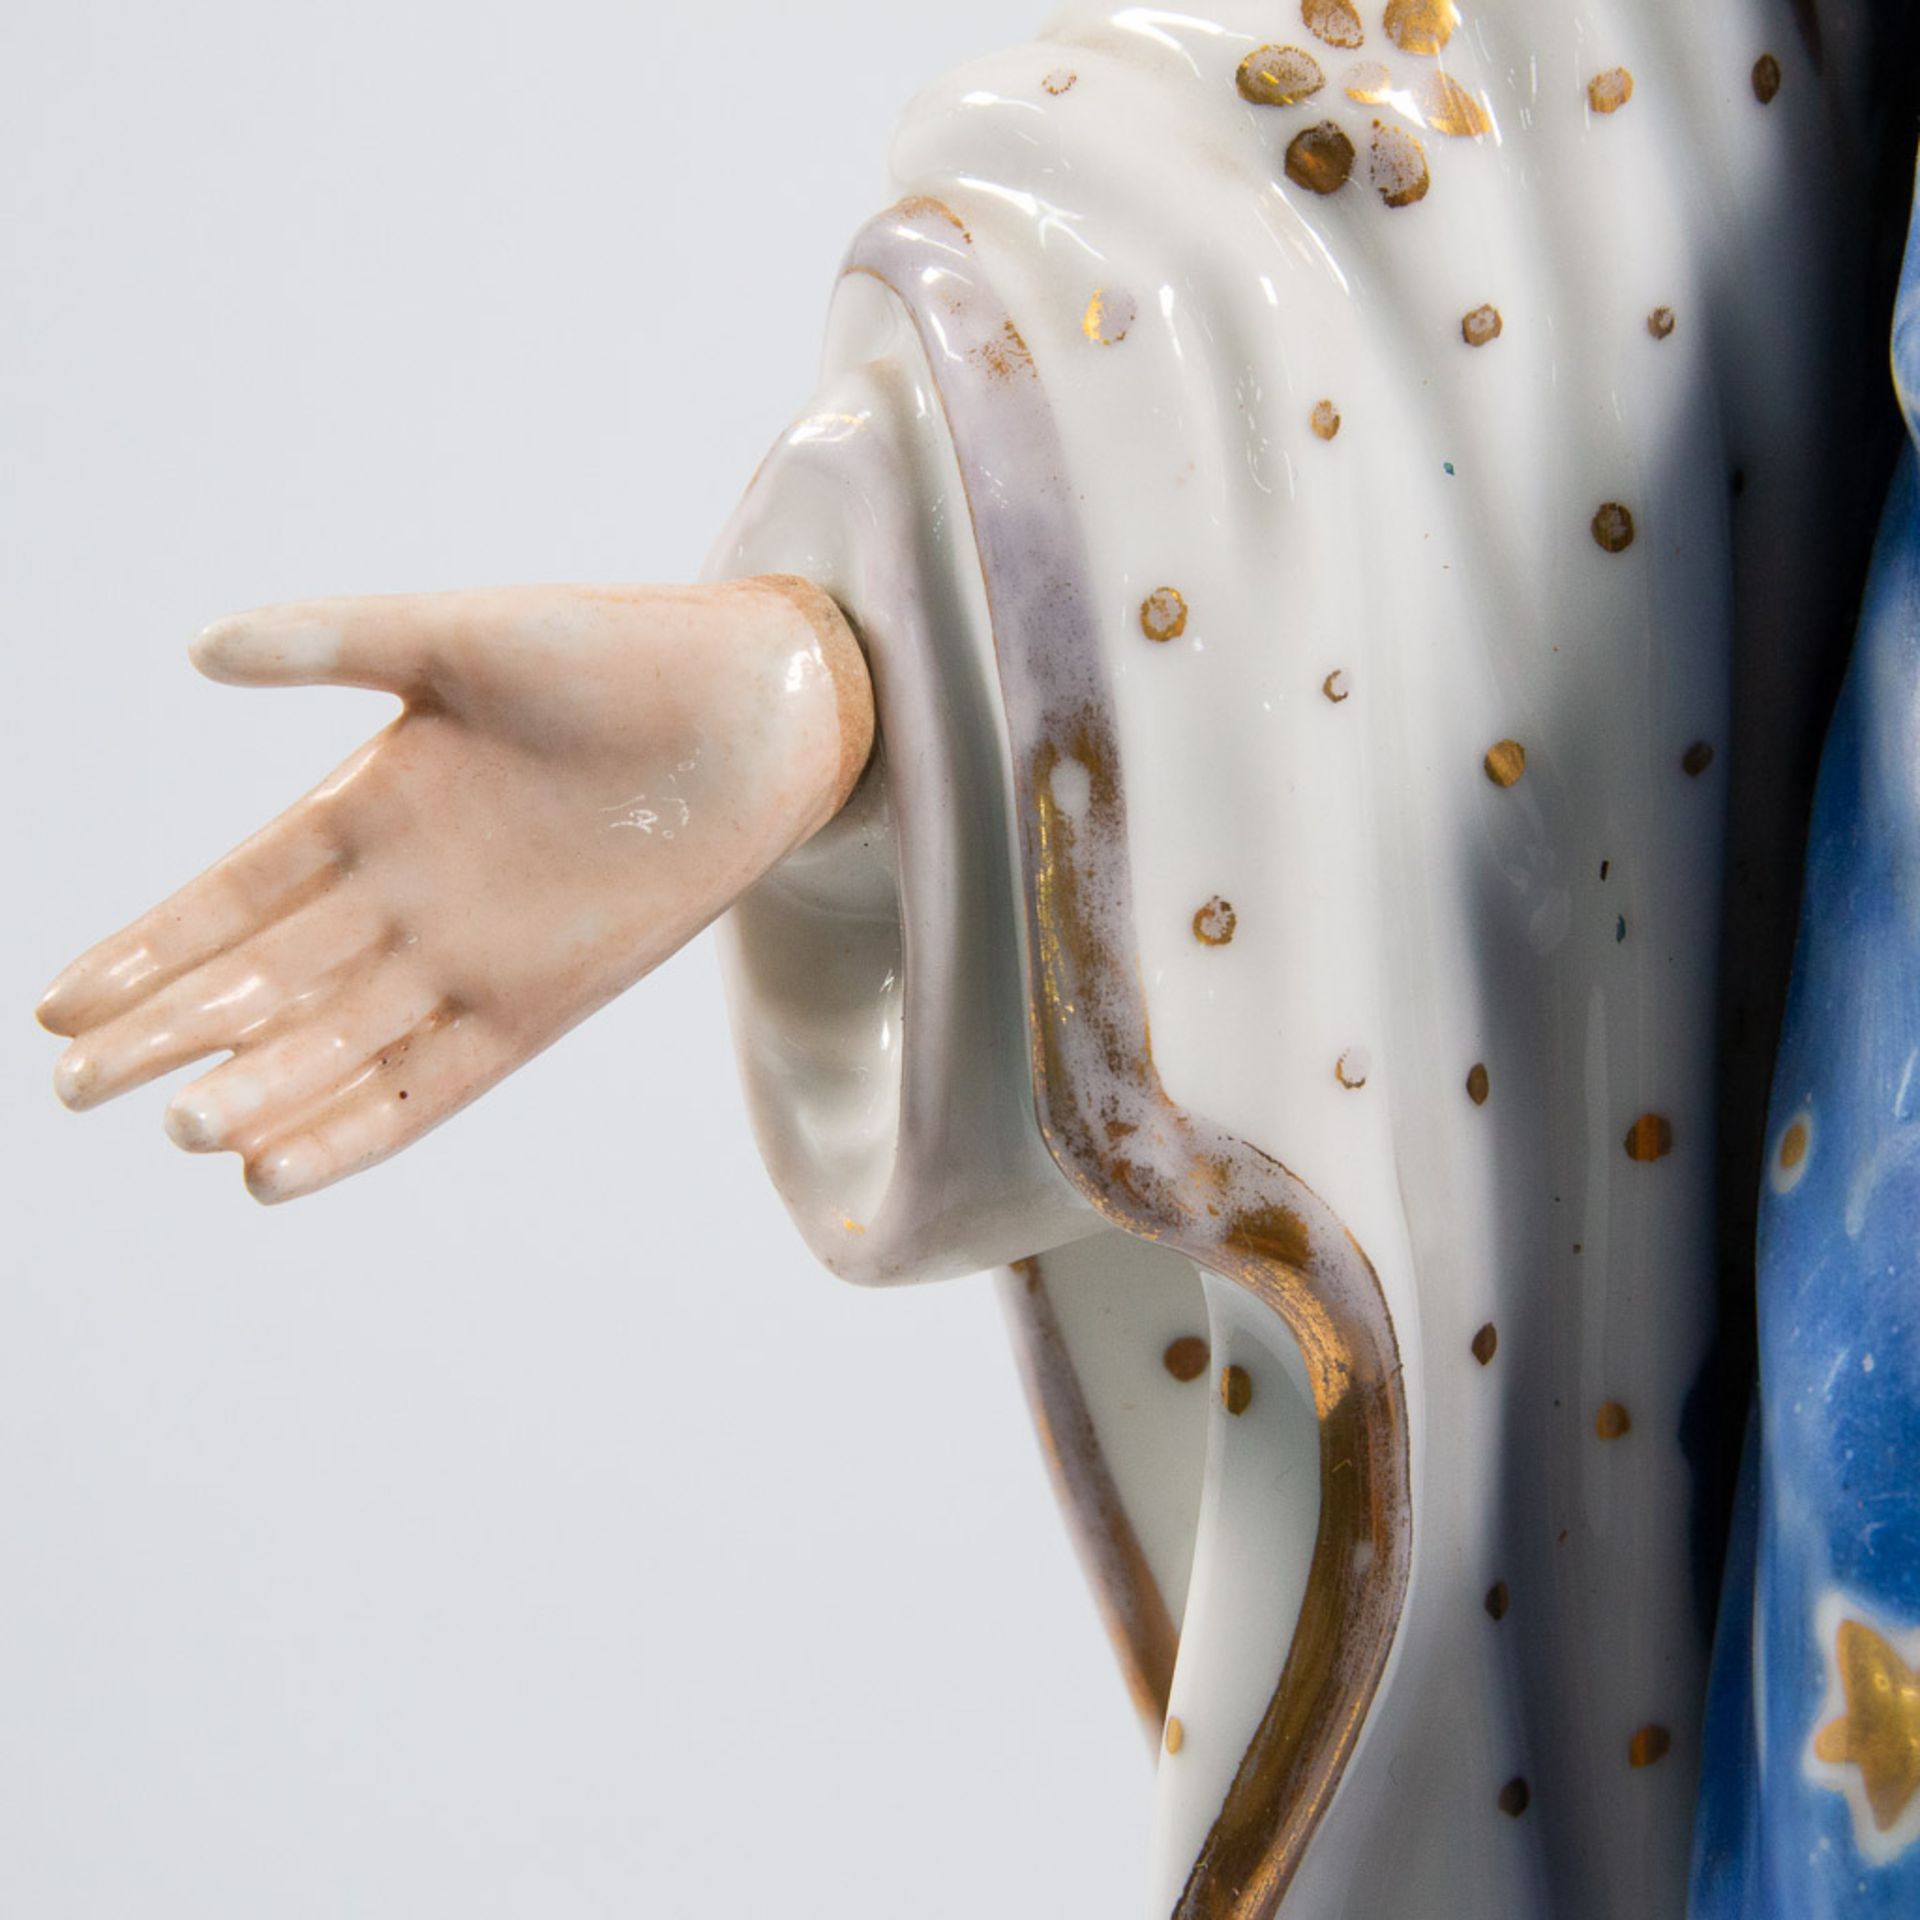 Madonna made of porcelain, 19th century - Image 11 of 18